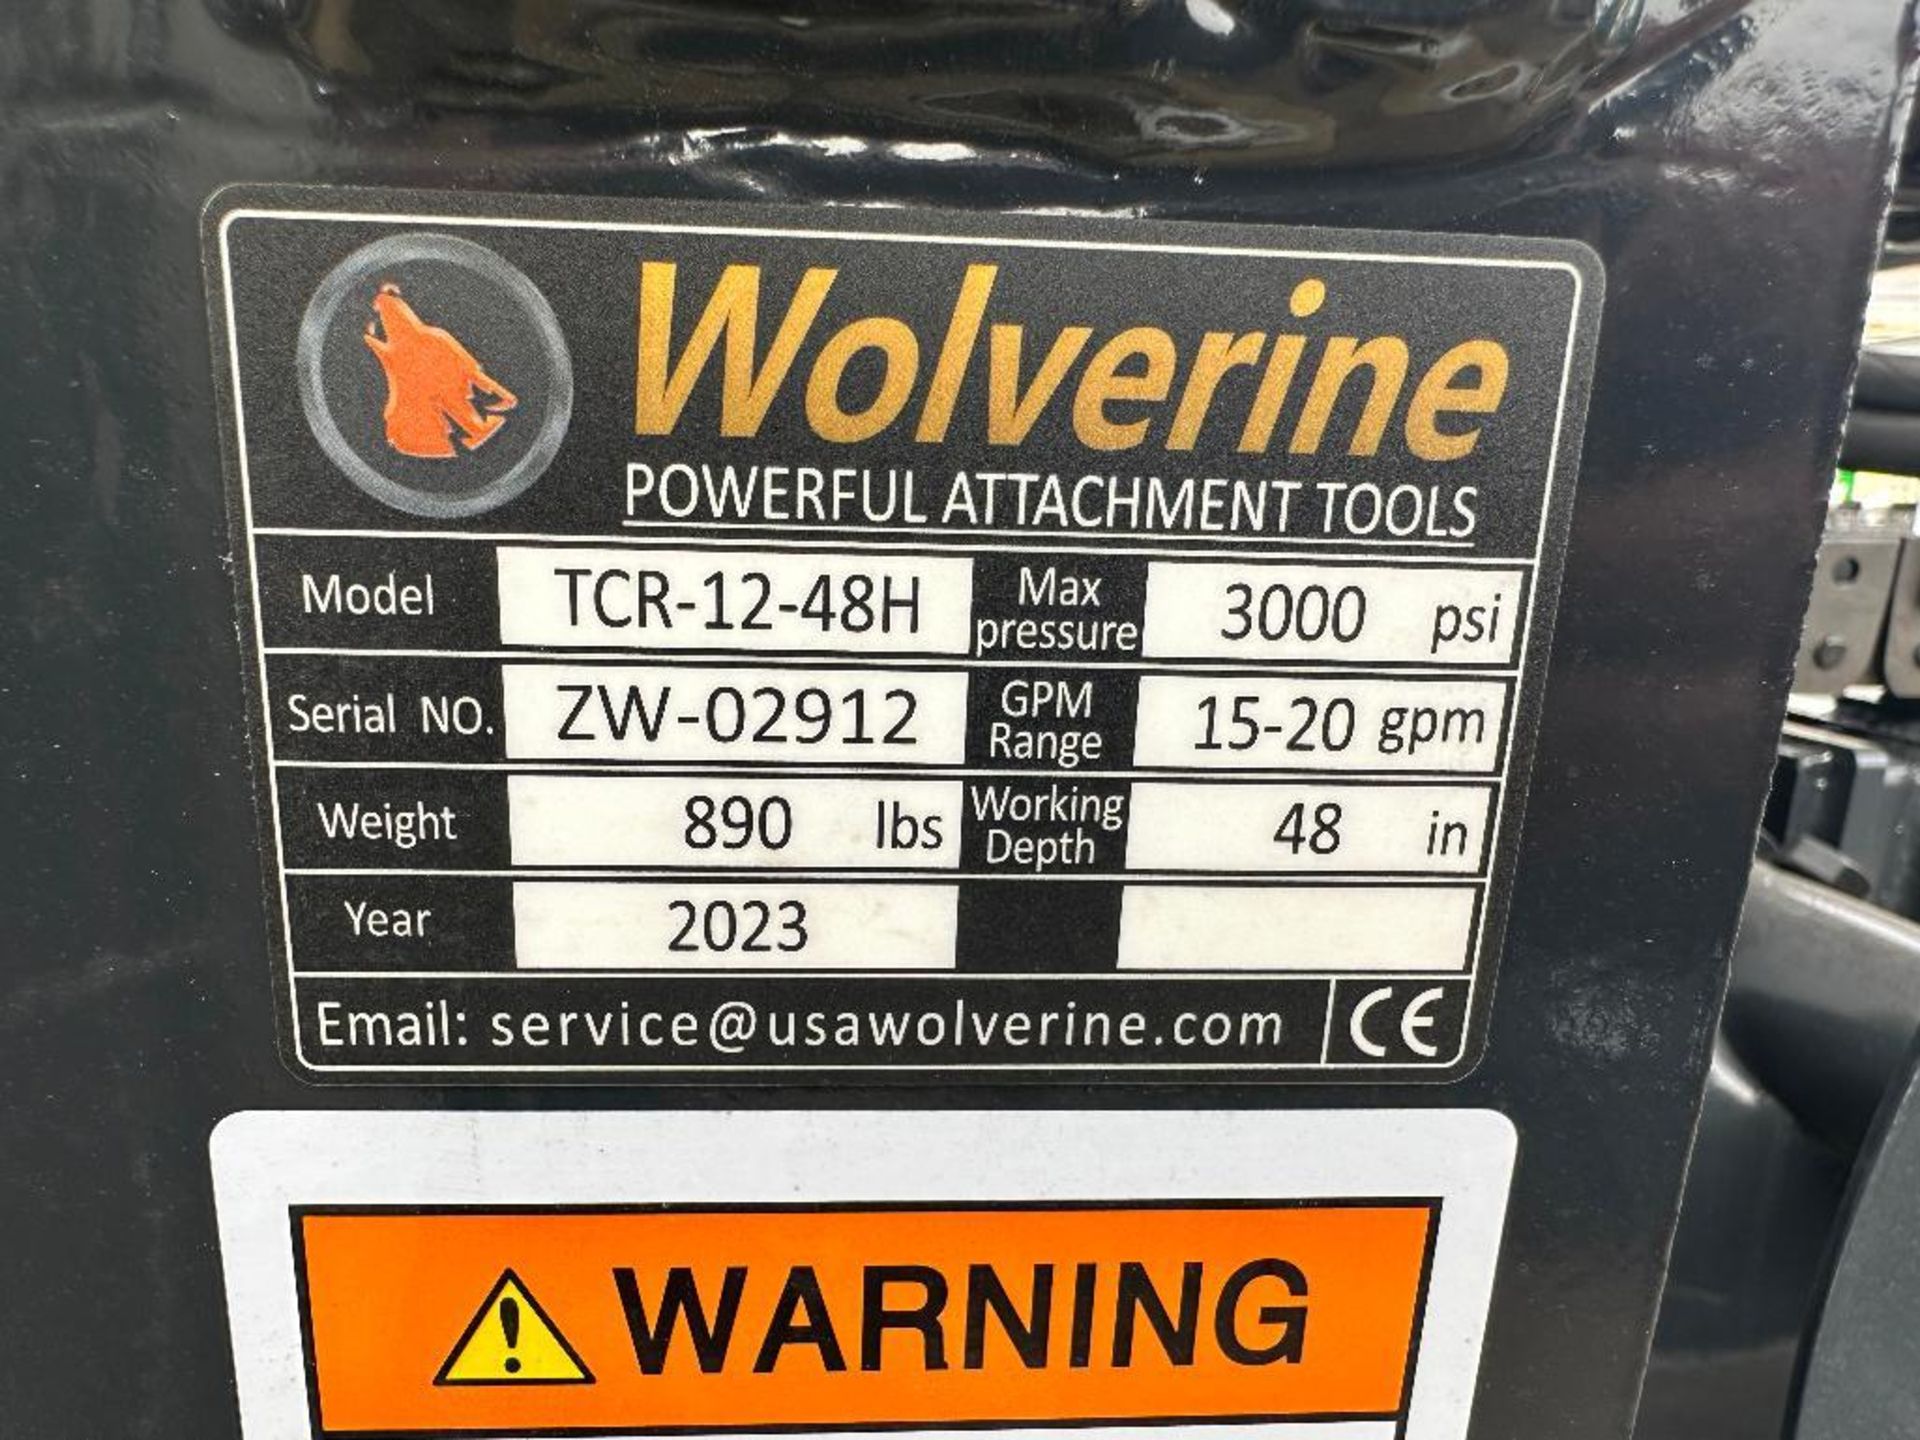 New 2023 Wolverine TCR-12-48H 48" Skid Steer Trencher Attachment - Image 5 of 5